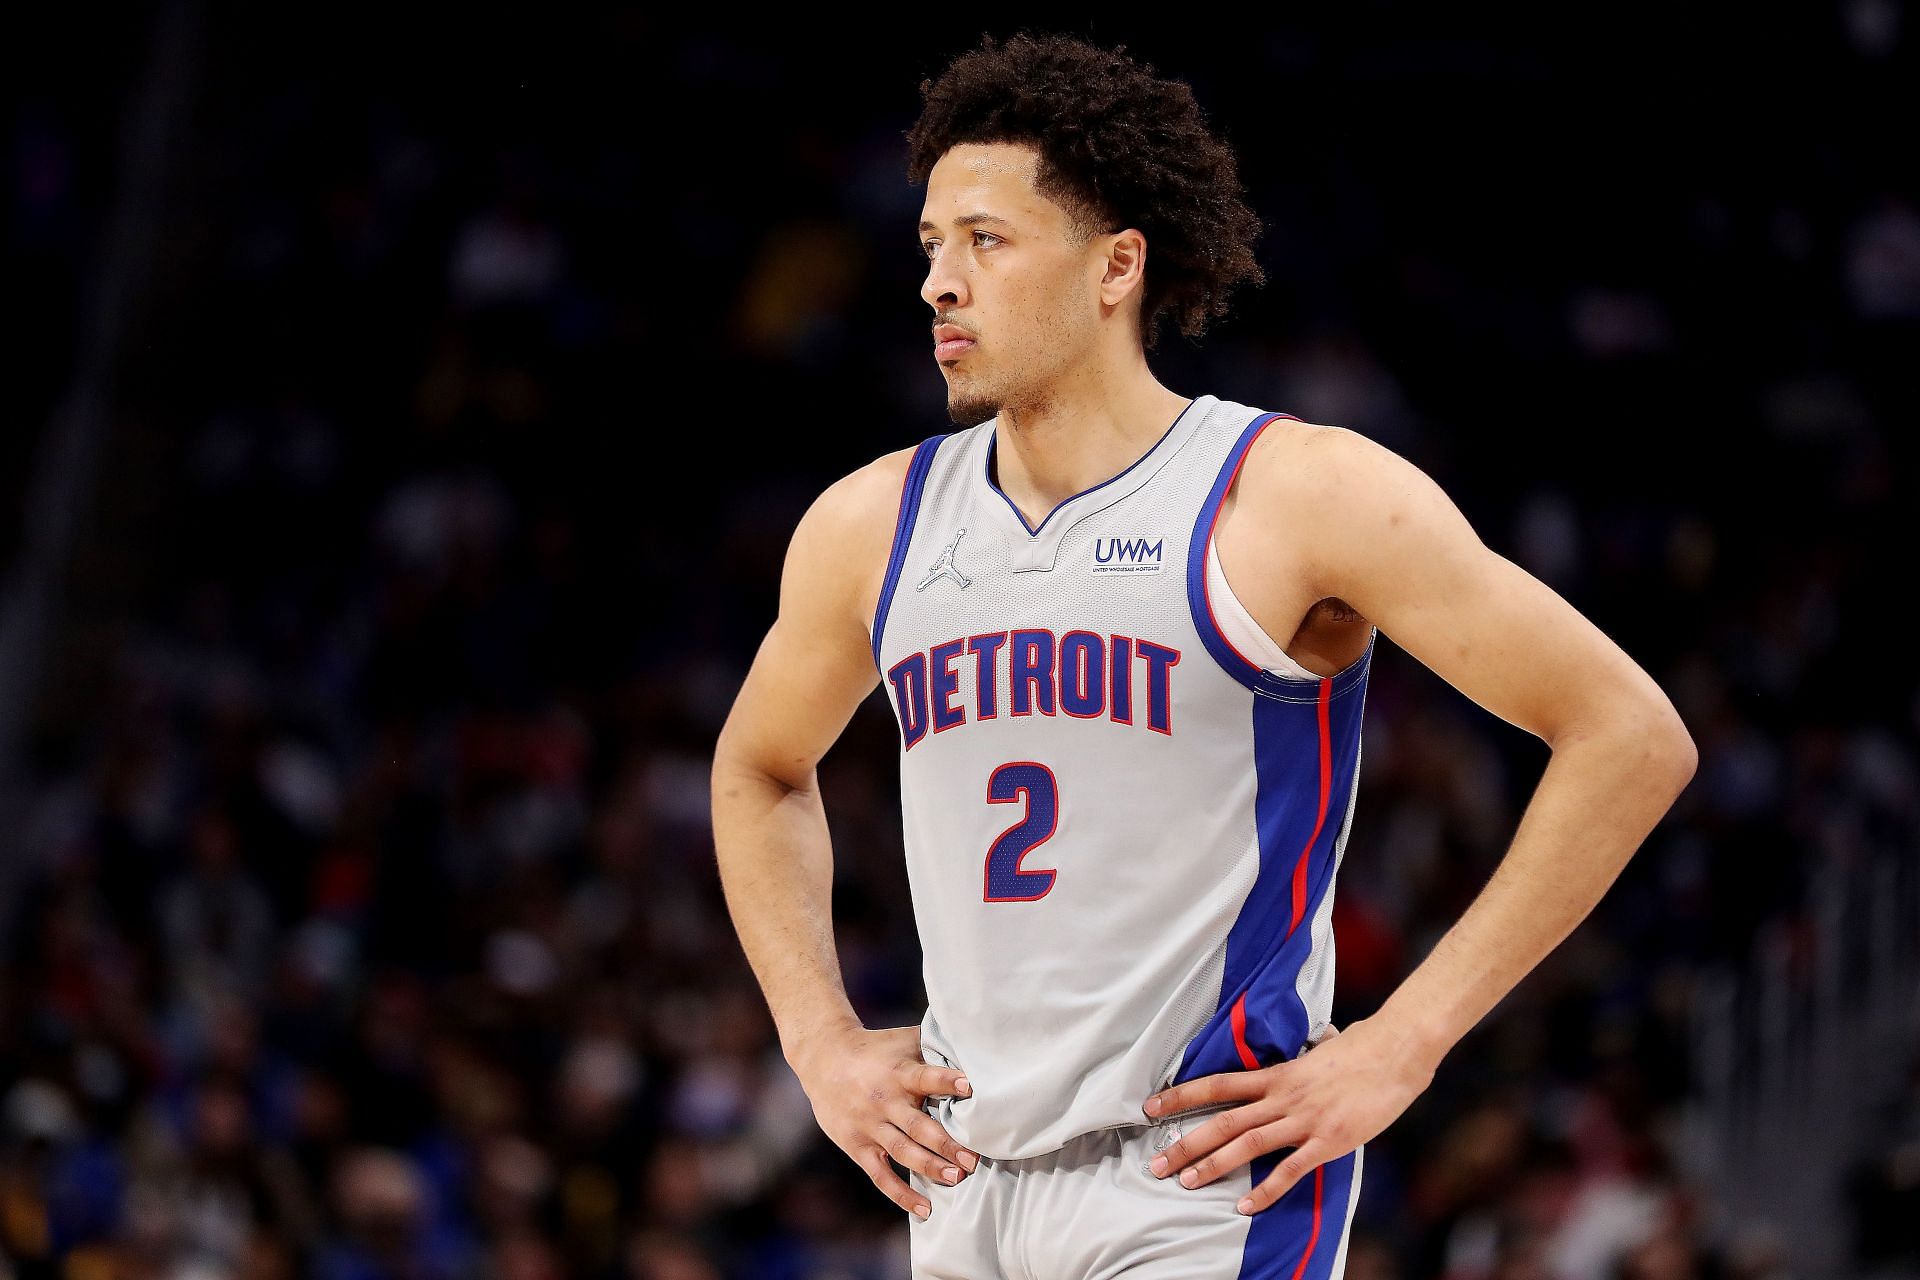 Detroit Pistons rookie Cade Cunningham has started to find his groove